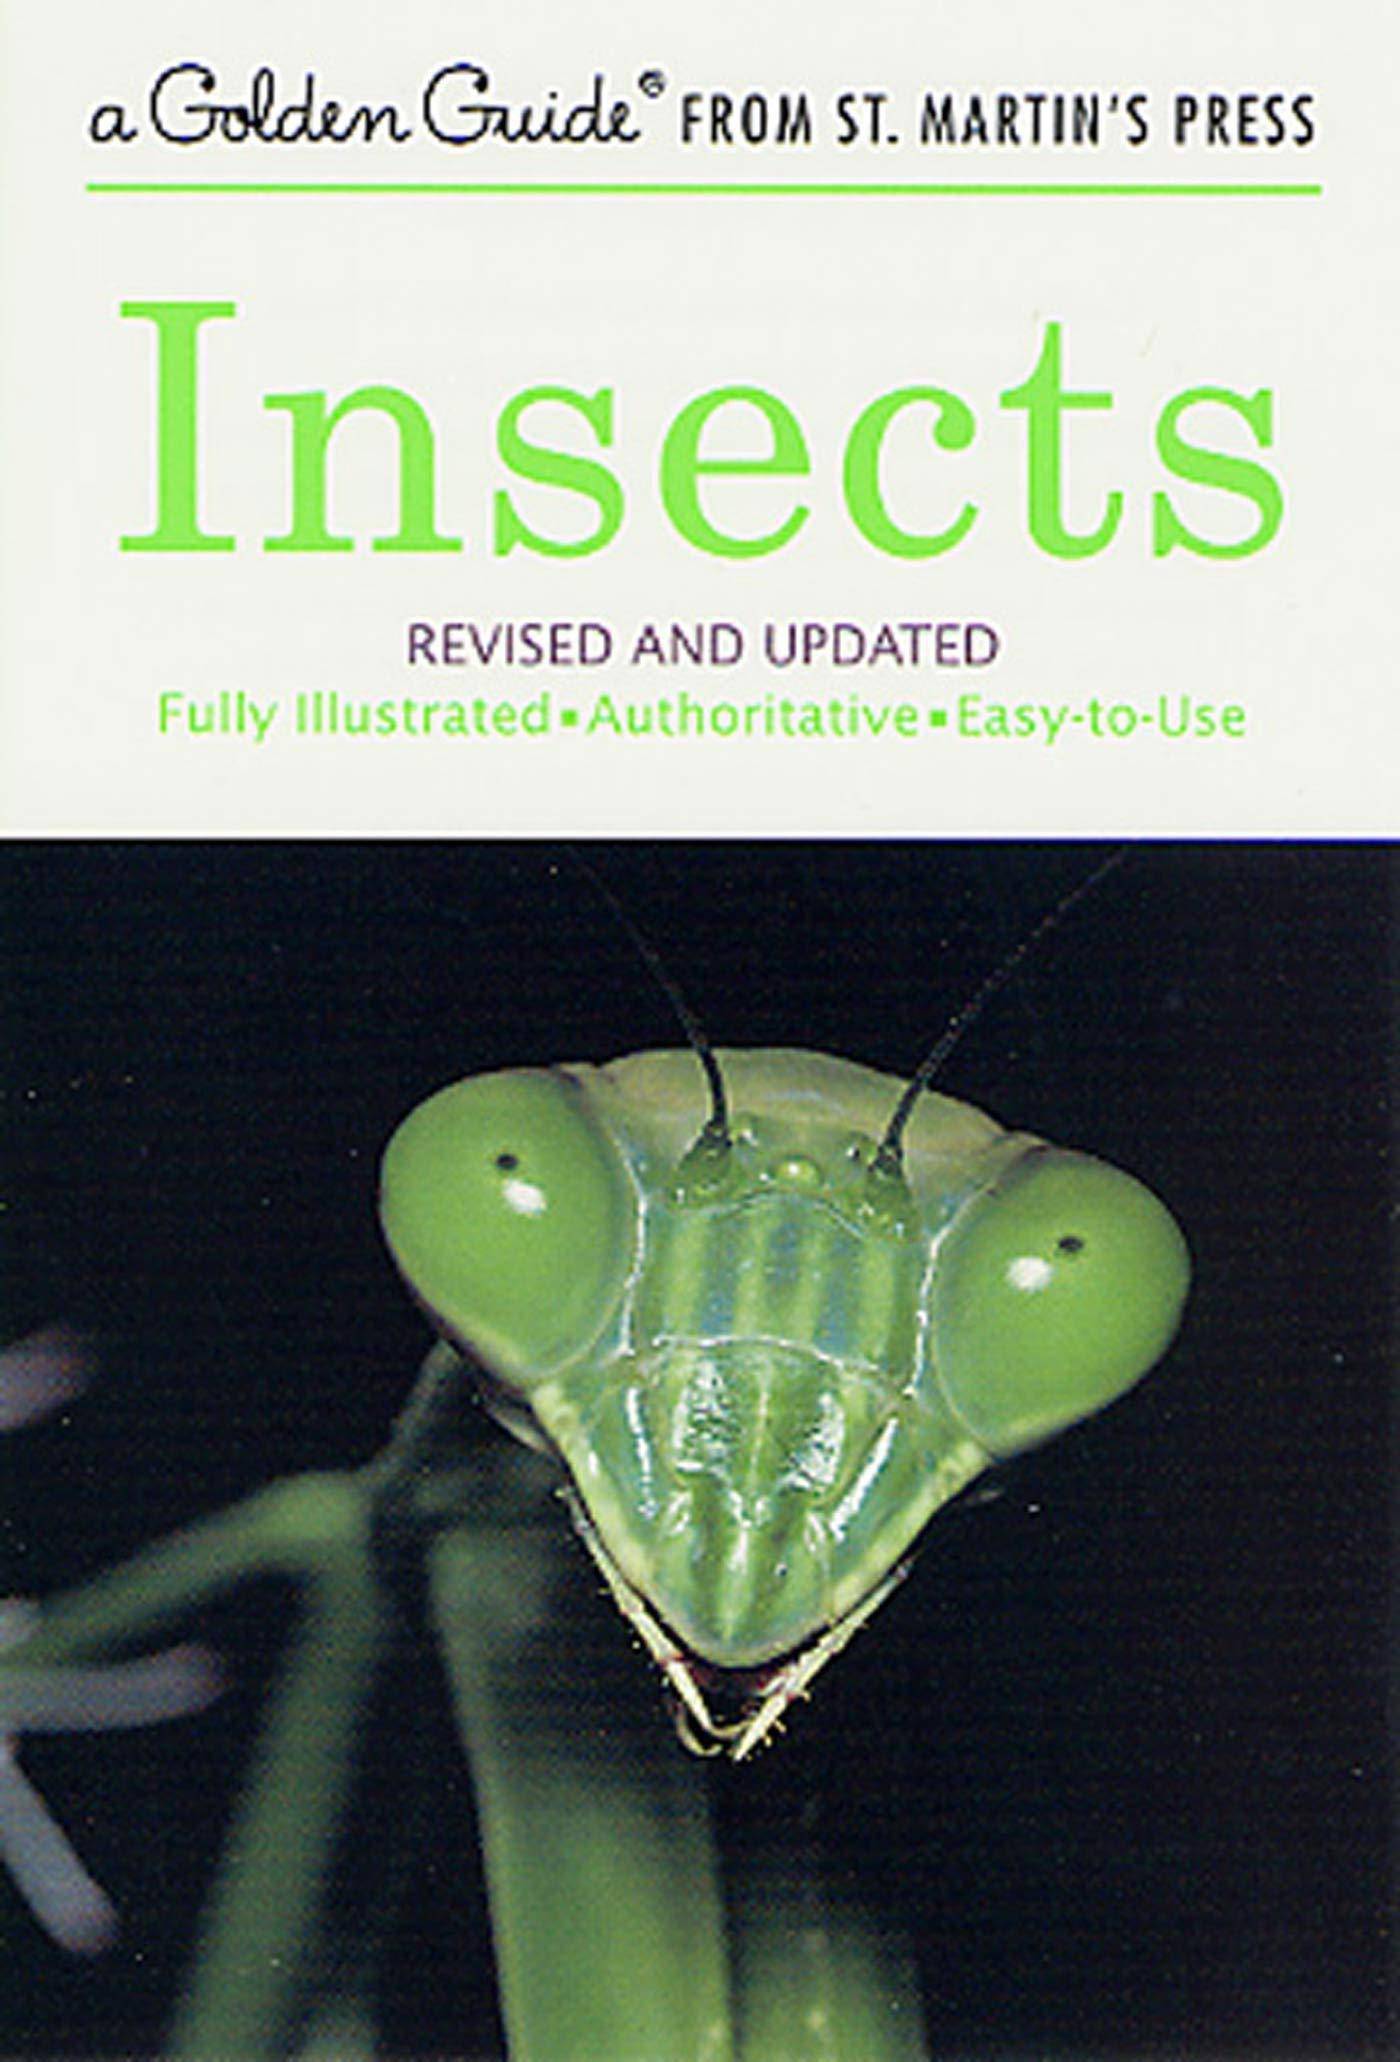 Golden Guide 160 Pages Paperback Insects Book - SureShot Books Publishing LLC